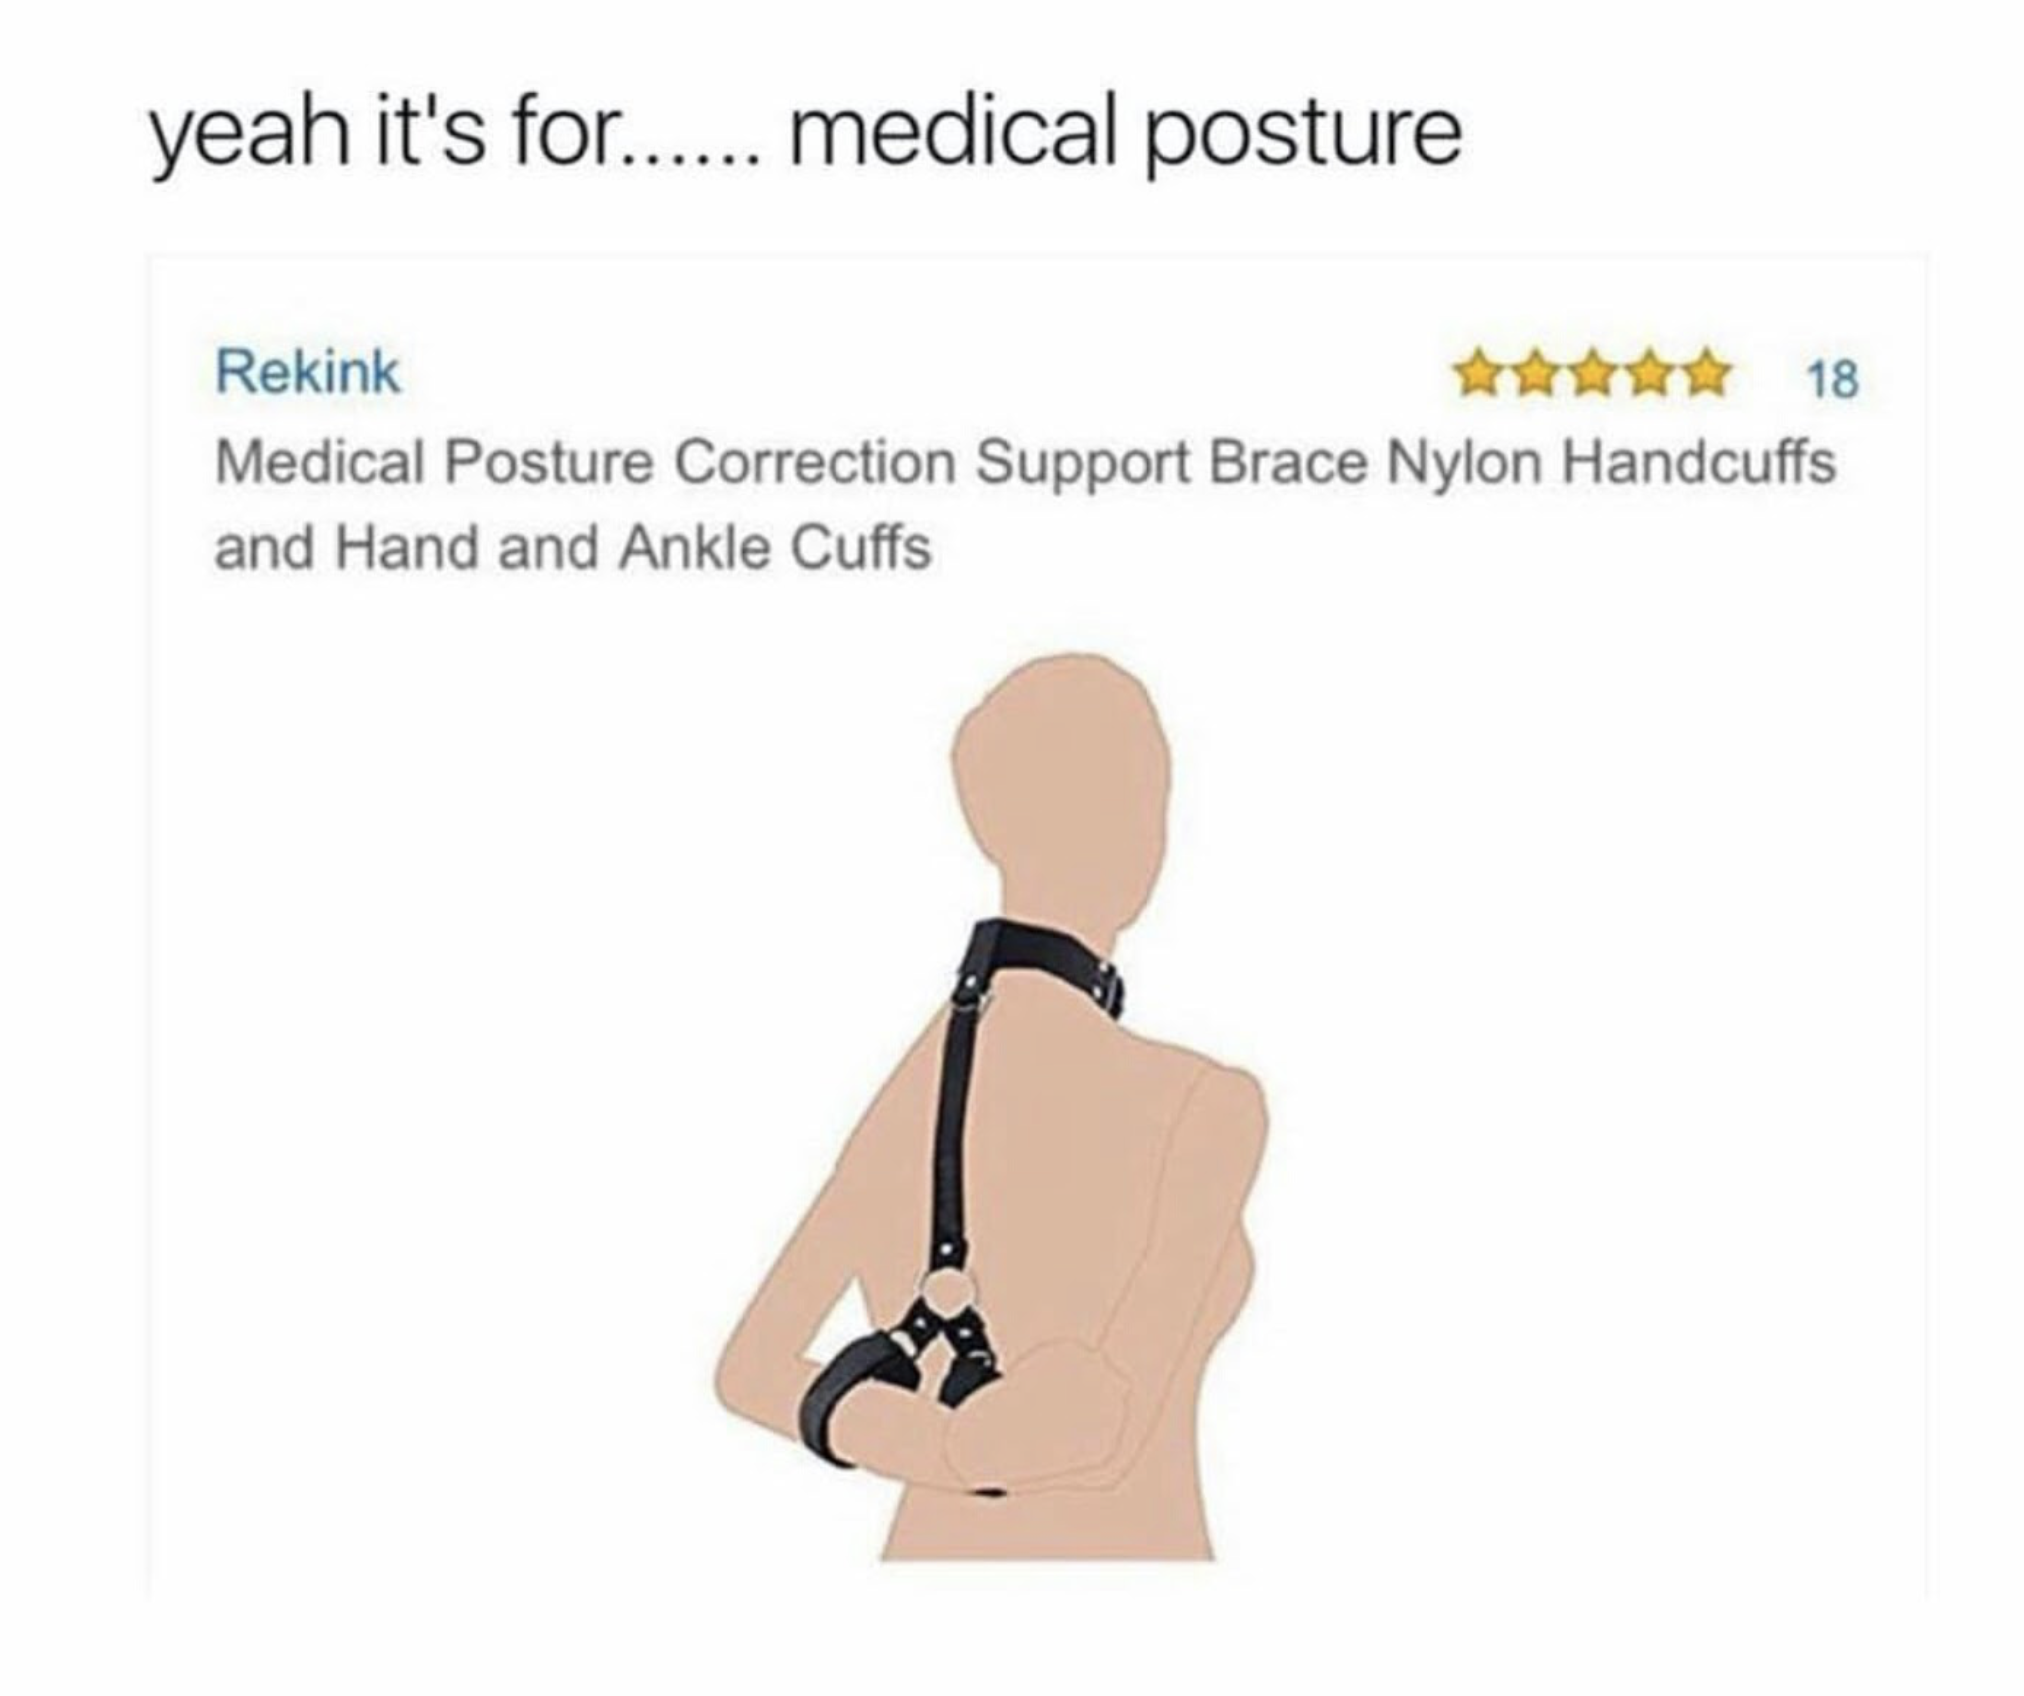 funny amazon prime - yeah it's for...... medical posture 18 Rekink Medical Posture Correction Support Brace Nylon Handcuffs and Hand and Ankle Cuffs